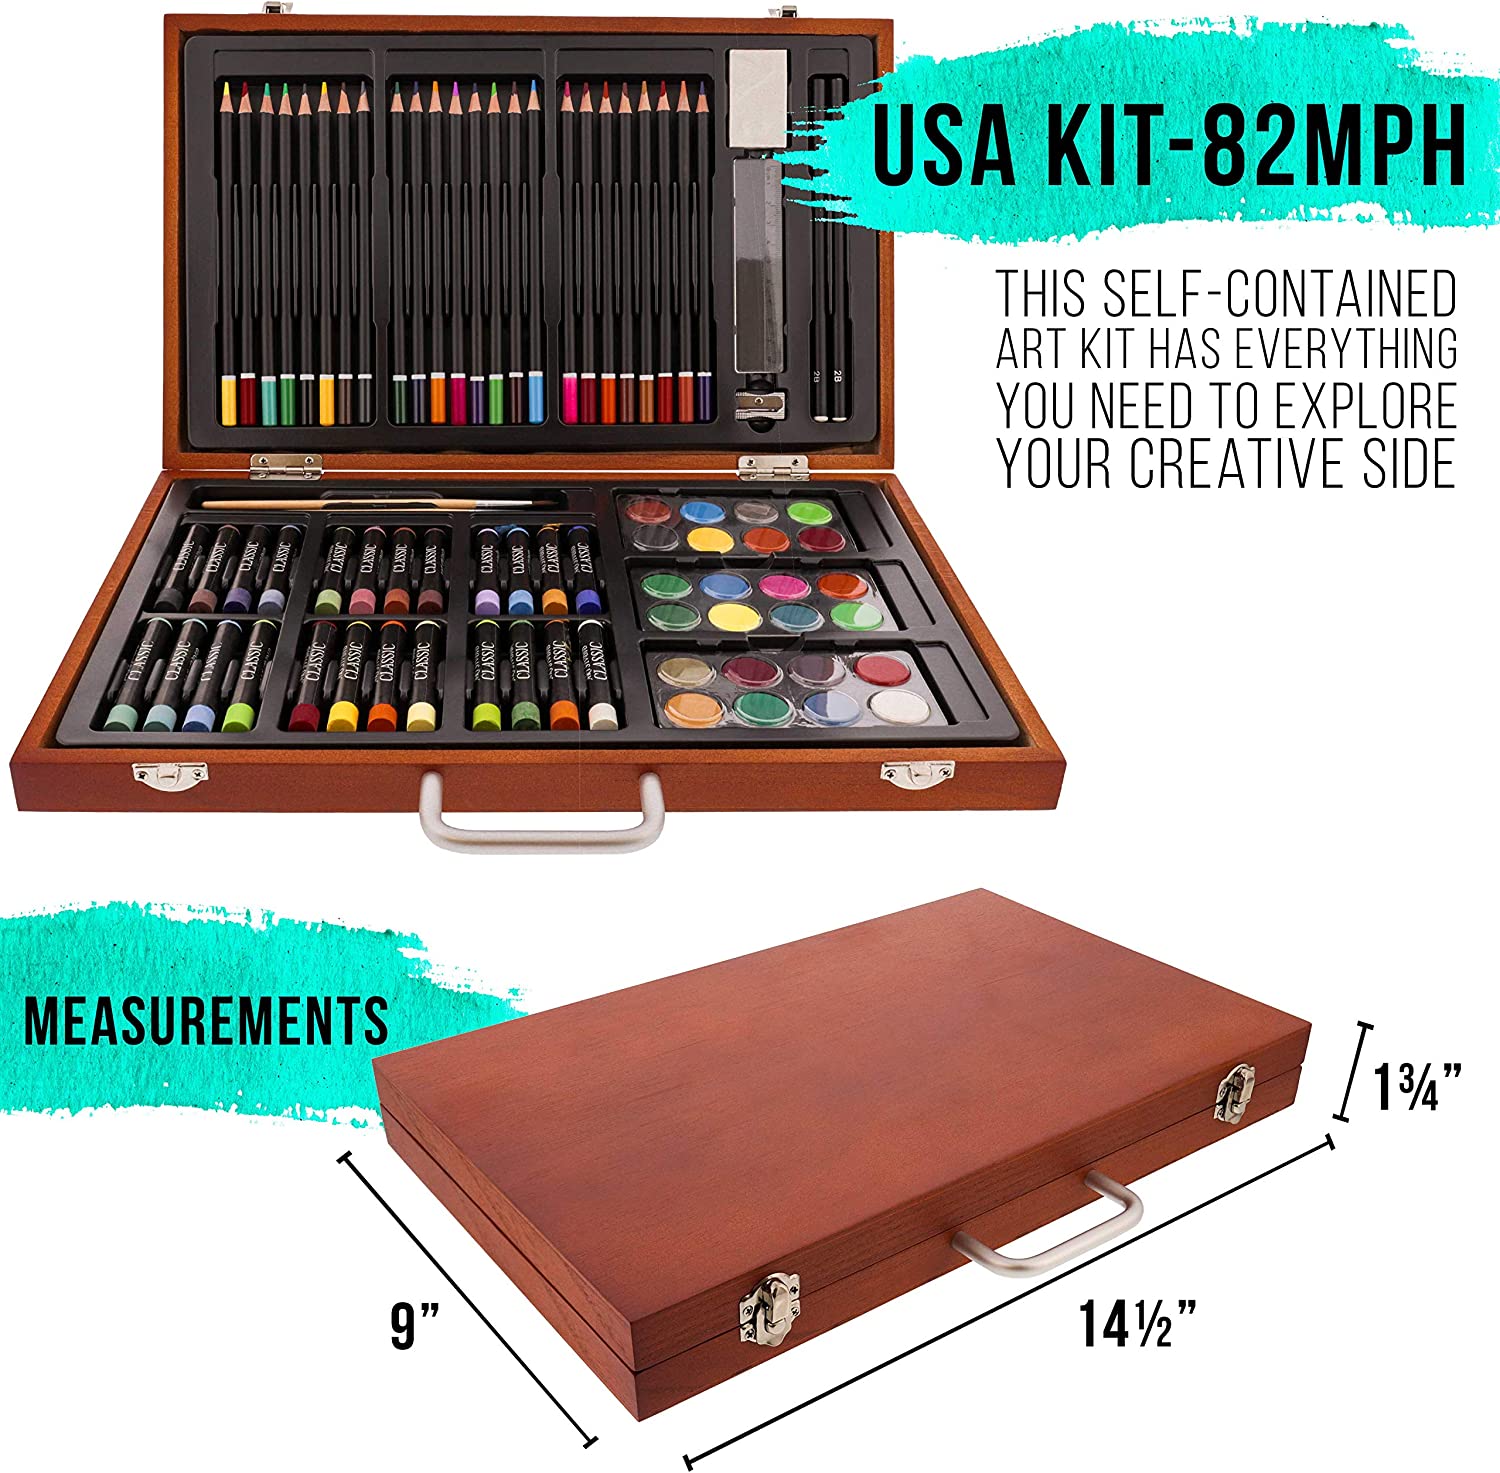 A 102 piece artist drawing set is displayed in a wooden case. The size of the wooden case is shown. The size is 14.5 inches long x 9 inches deep x 1.3/4 inches in width.